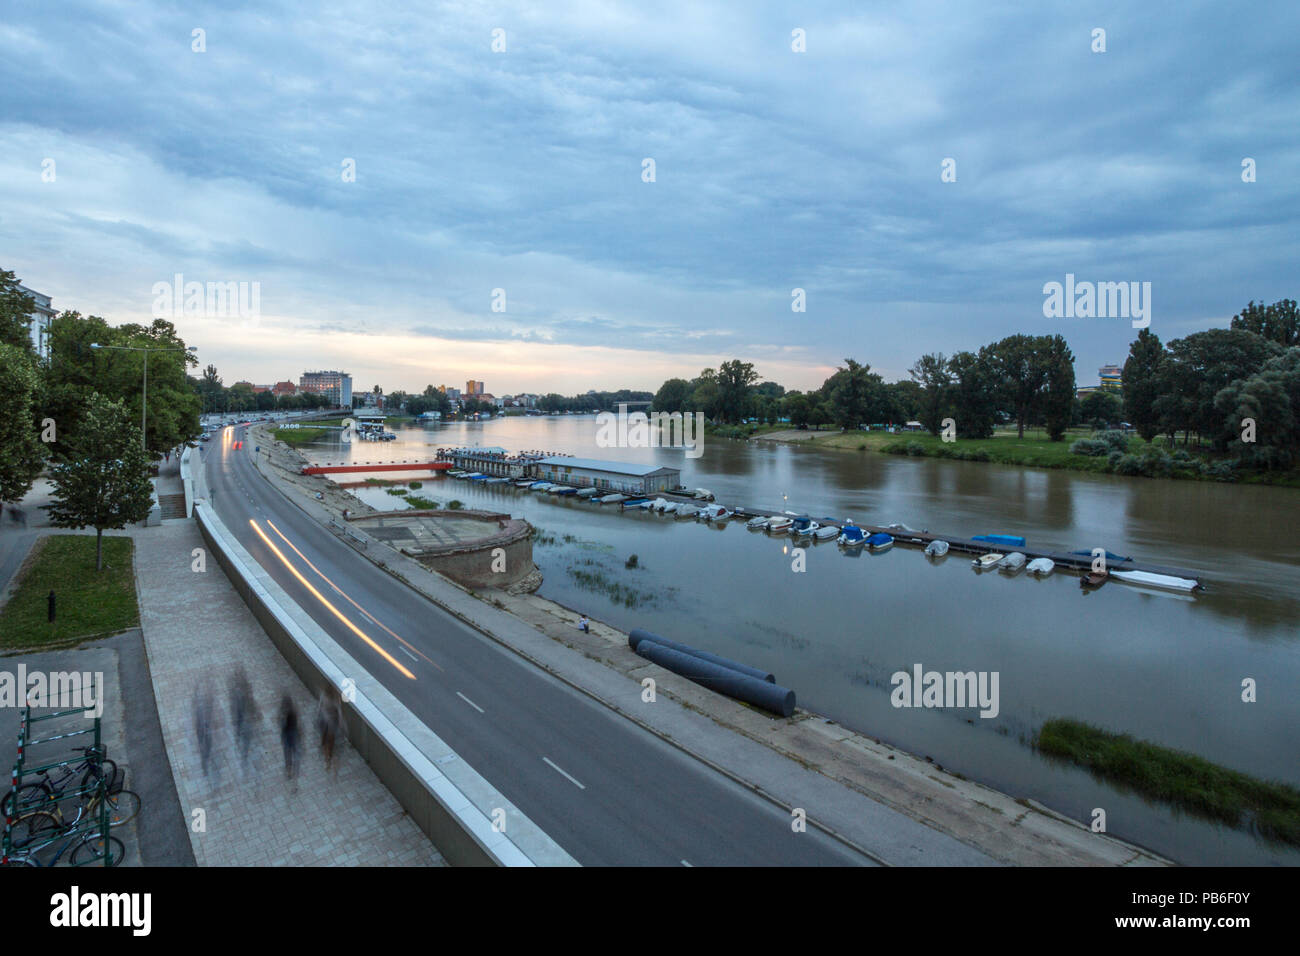 SZEGED, HUNGARY - JULY 4, 2018: Tisza river banks in Szeged city center, seen into the light during sunset during a cloudy summer afternoon. Szeged is Stock Photo